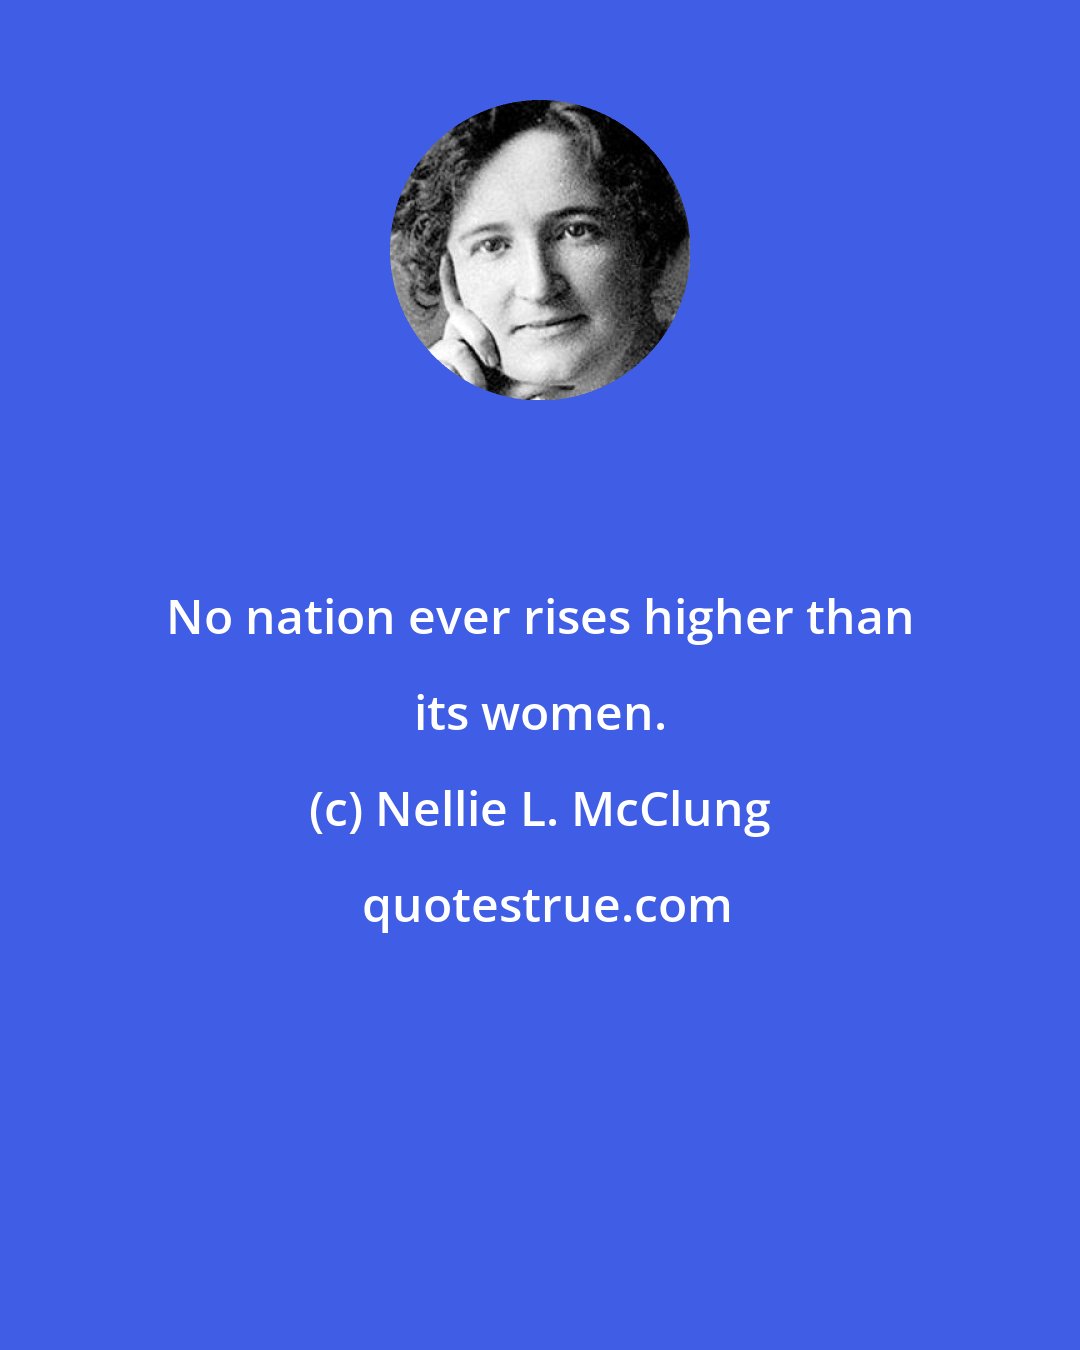 Nellie L. McClung: No nation ever rises higher than its women.